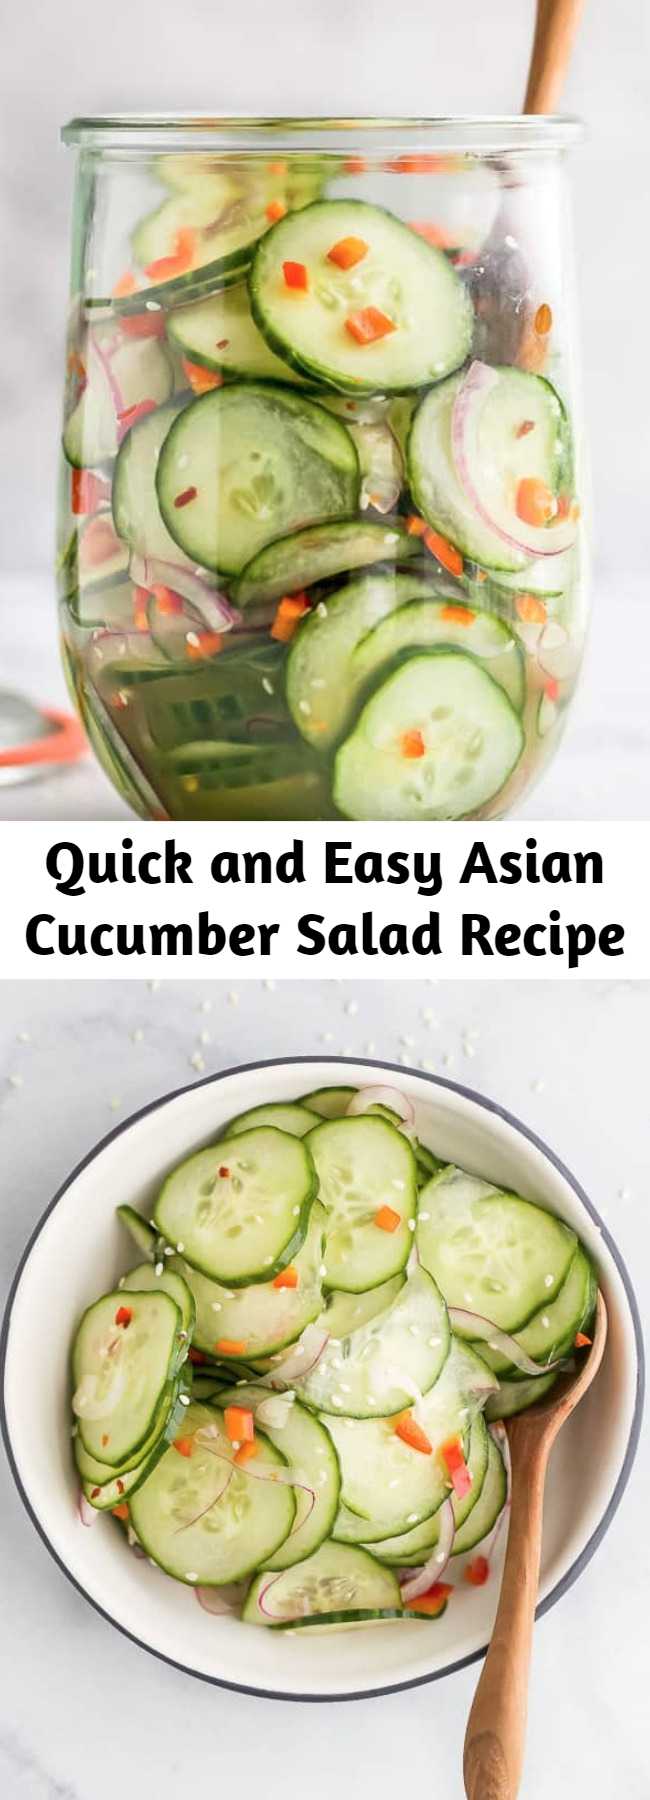 Quick and Easy Asian Cucumber Salad Recipe - Made with crunchy cucumber, onion, rice wine vinegar, and a few secret ingredients! An easy, light, refreshing Cucumber Salad that’s guaranteed to be a hit.